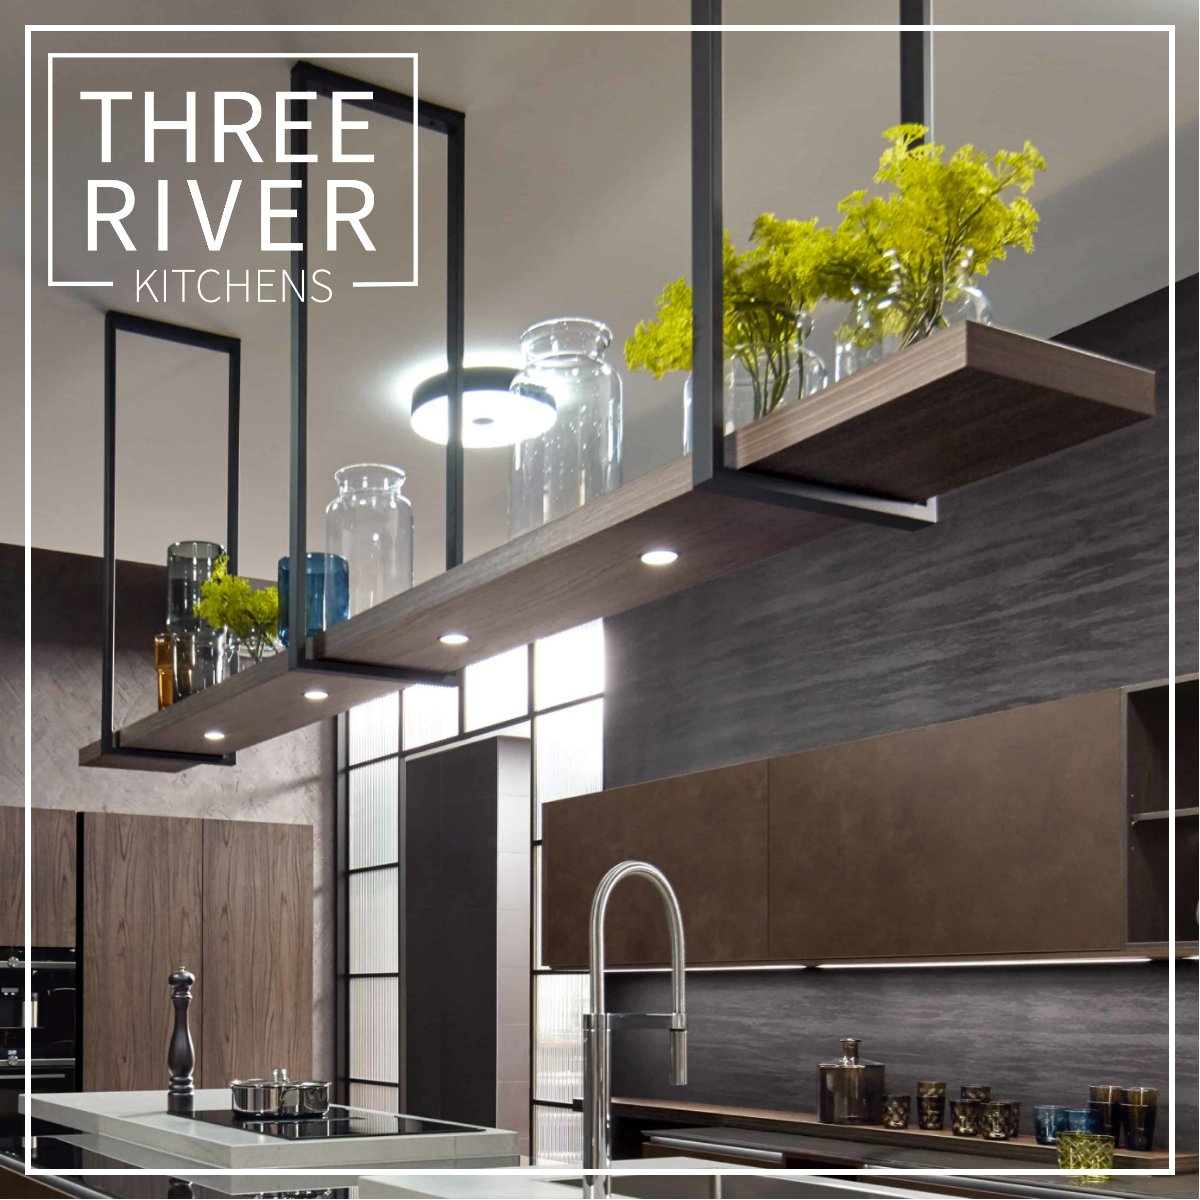 Transform your space with a cutting-edge kitchen by Three River Kitchens. Where style meets modern living. Book a design consultation! #kitchendesign #kitchenideas #kitchendesignideas #kitchendesigner #kitchendesigntrends #essexbusiness #essexkitchens #chelmsfordbusiness